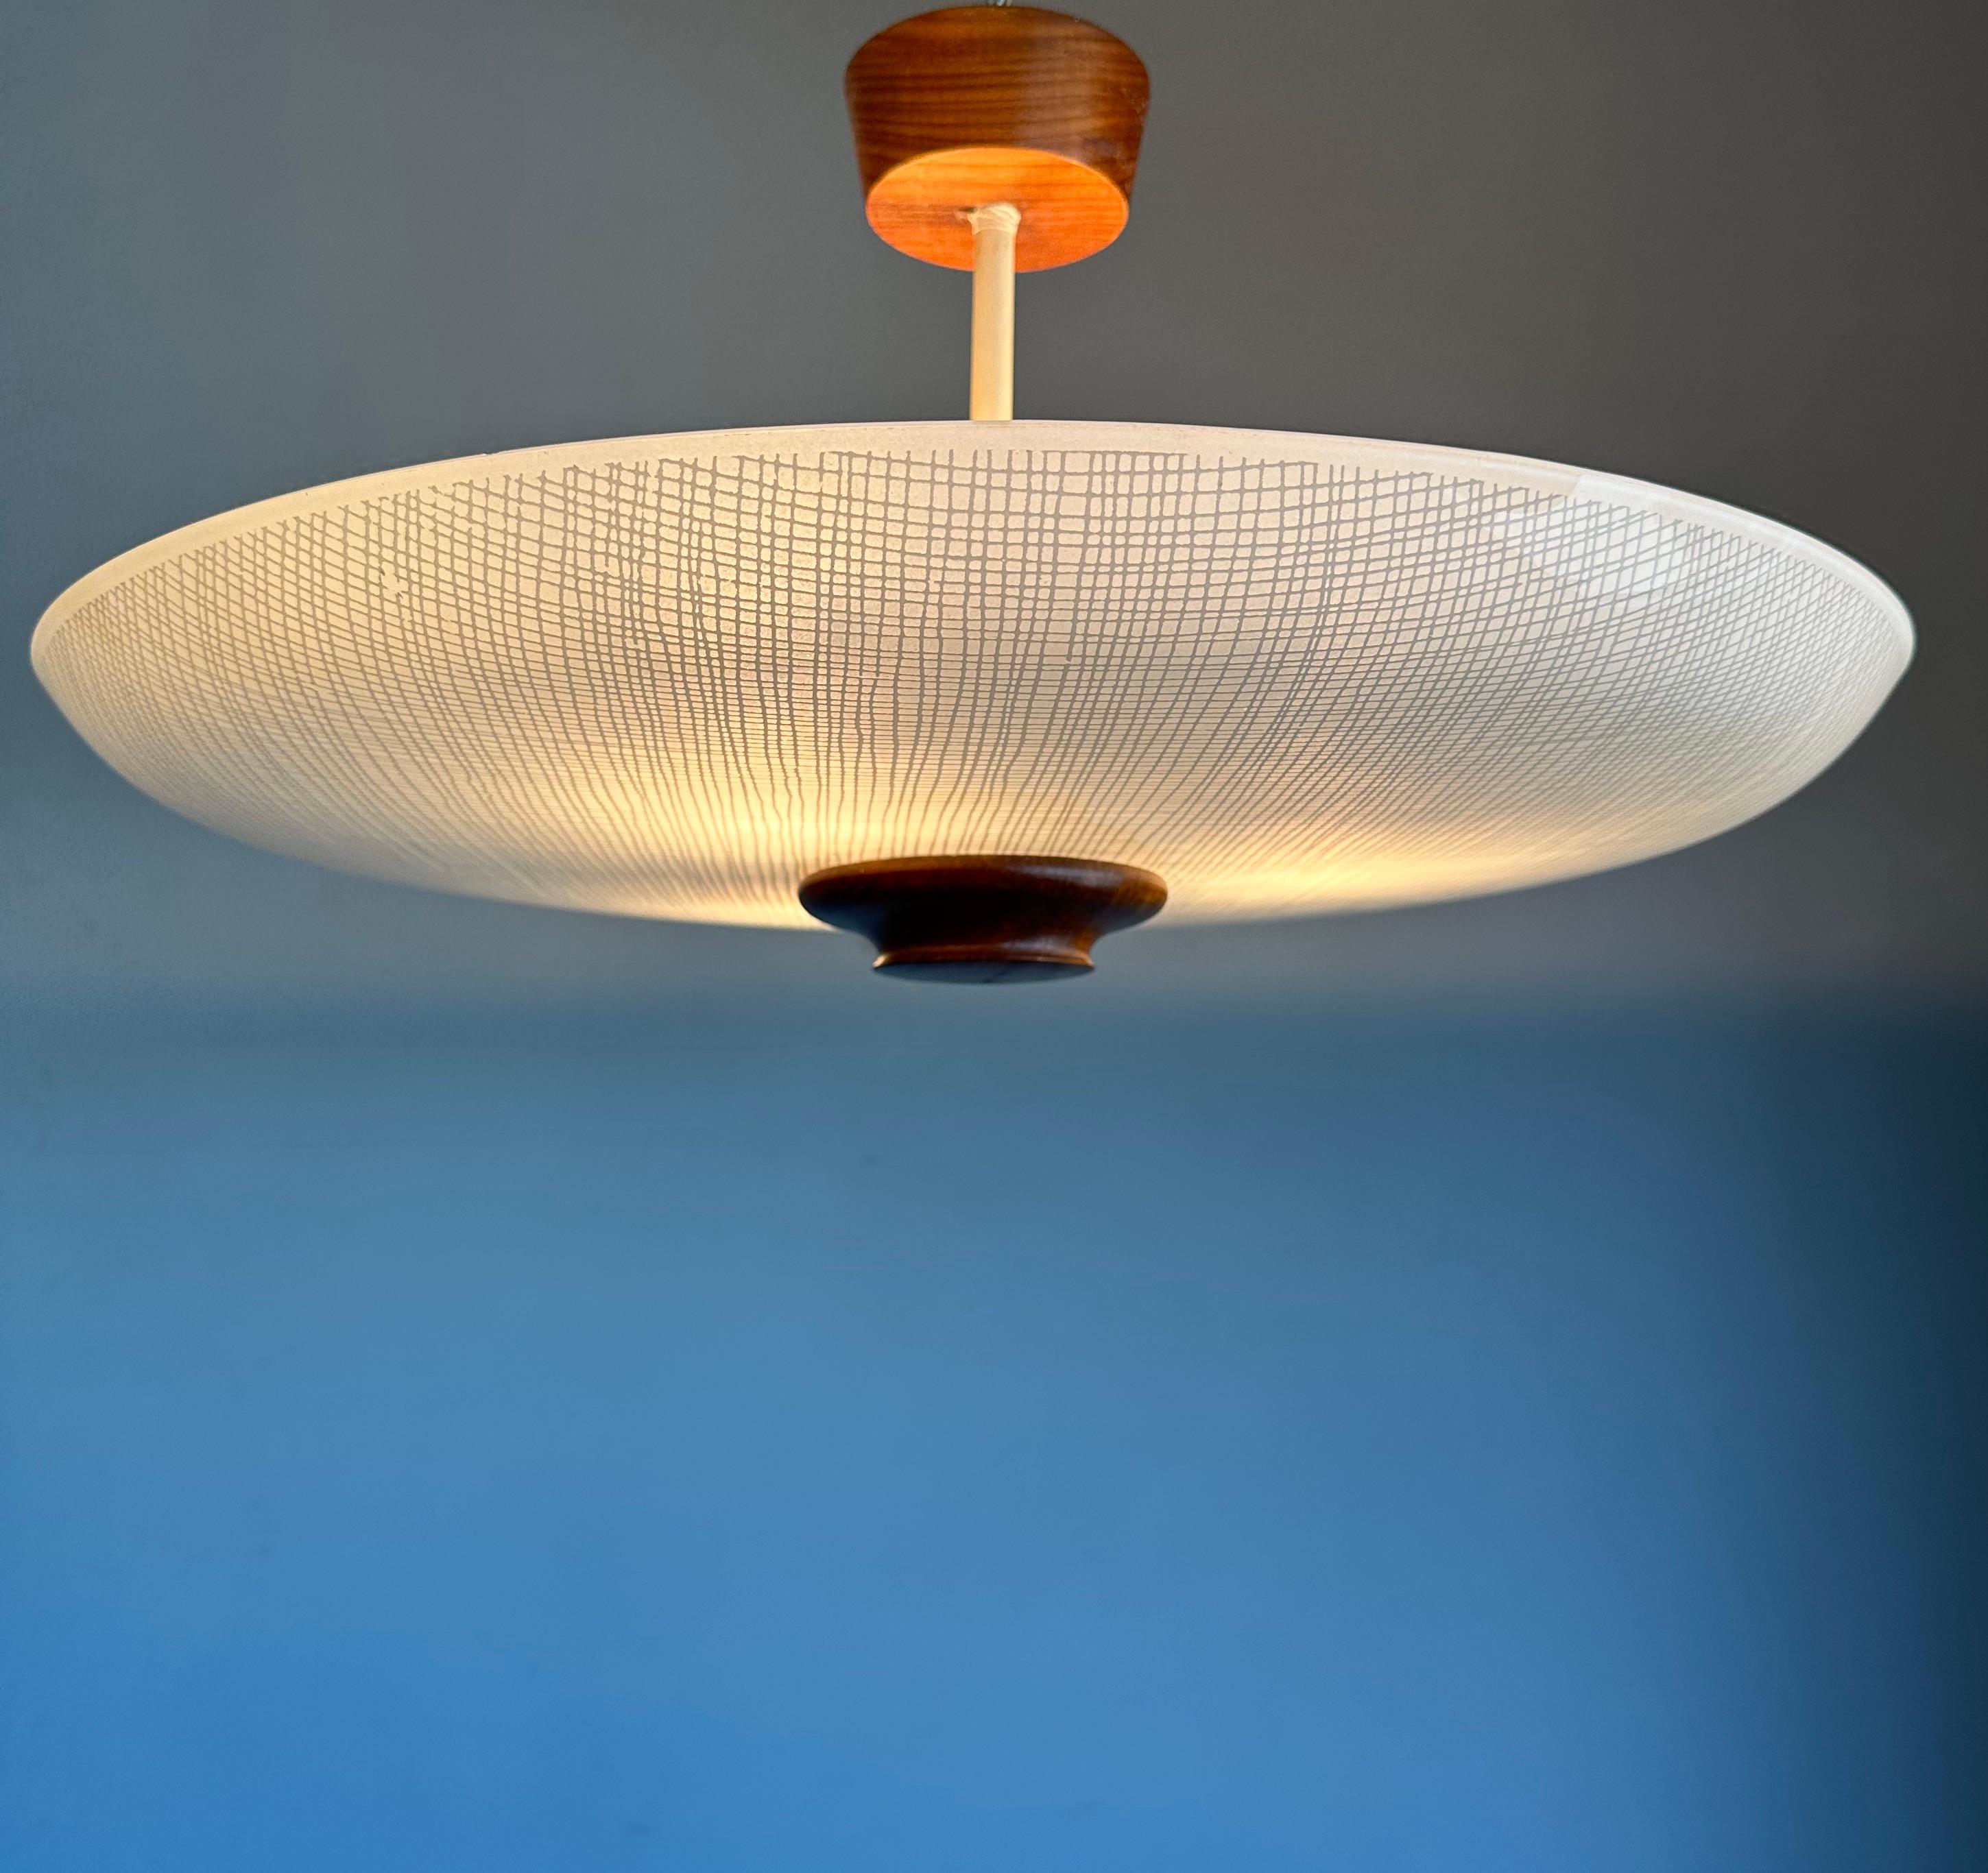 Great Mid-Century Modern ceiling light with teakwood finial & canopy and 'woven' stripes pattern in the glass shade.

This vintage, three-light flush mount has a beautiful look and feel and you will hardly ever find a light fixture from the